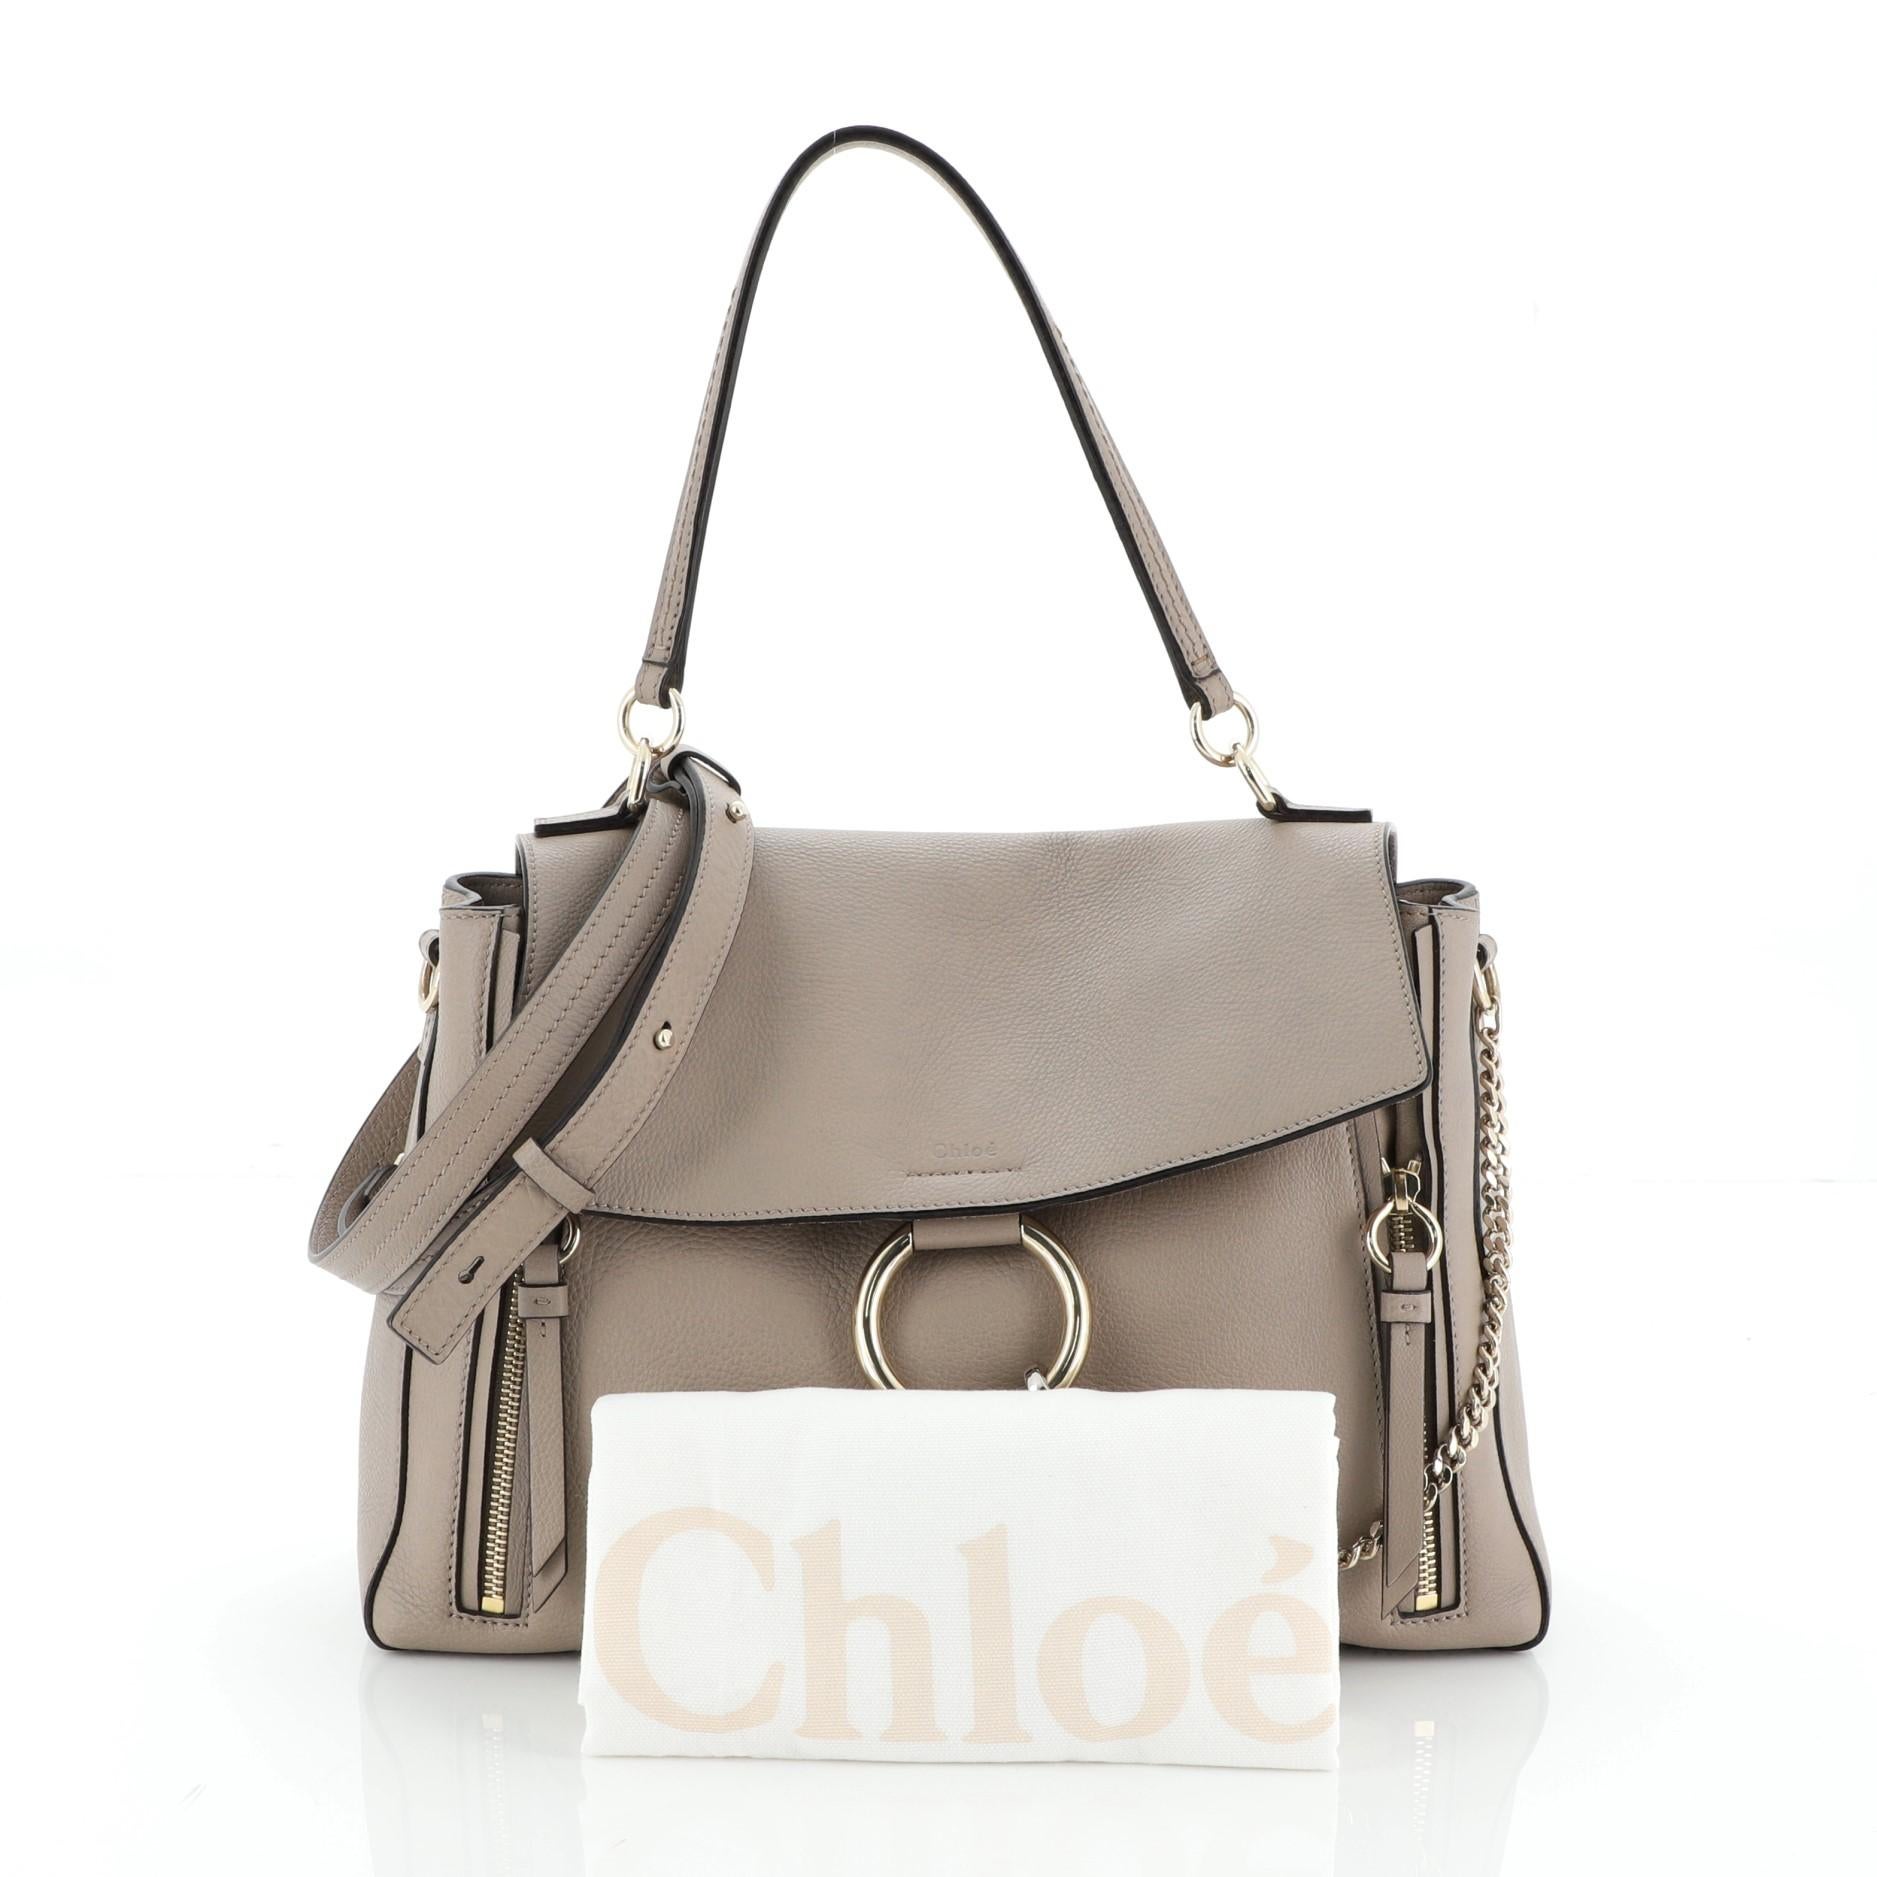 This Chloe Faye Day Bag Leather Medium, crafted from neutral leather, features leather top handle, removable shoulder strap, flap top with chain-clip and ring detail, dual side zips that expand bag, and silver-tone hardware. It opens to a neutral